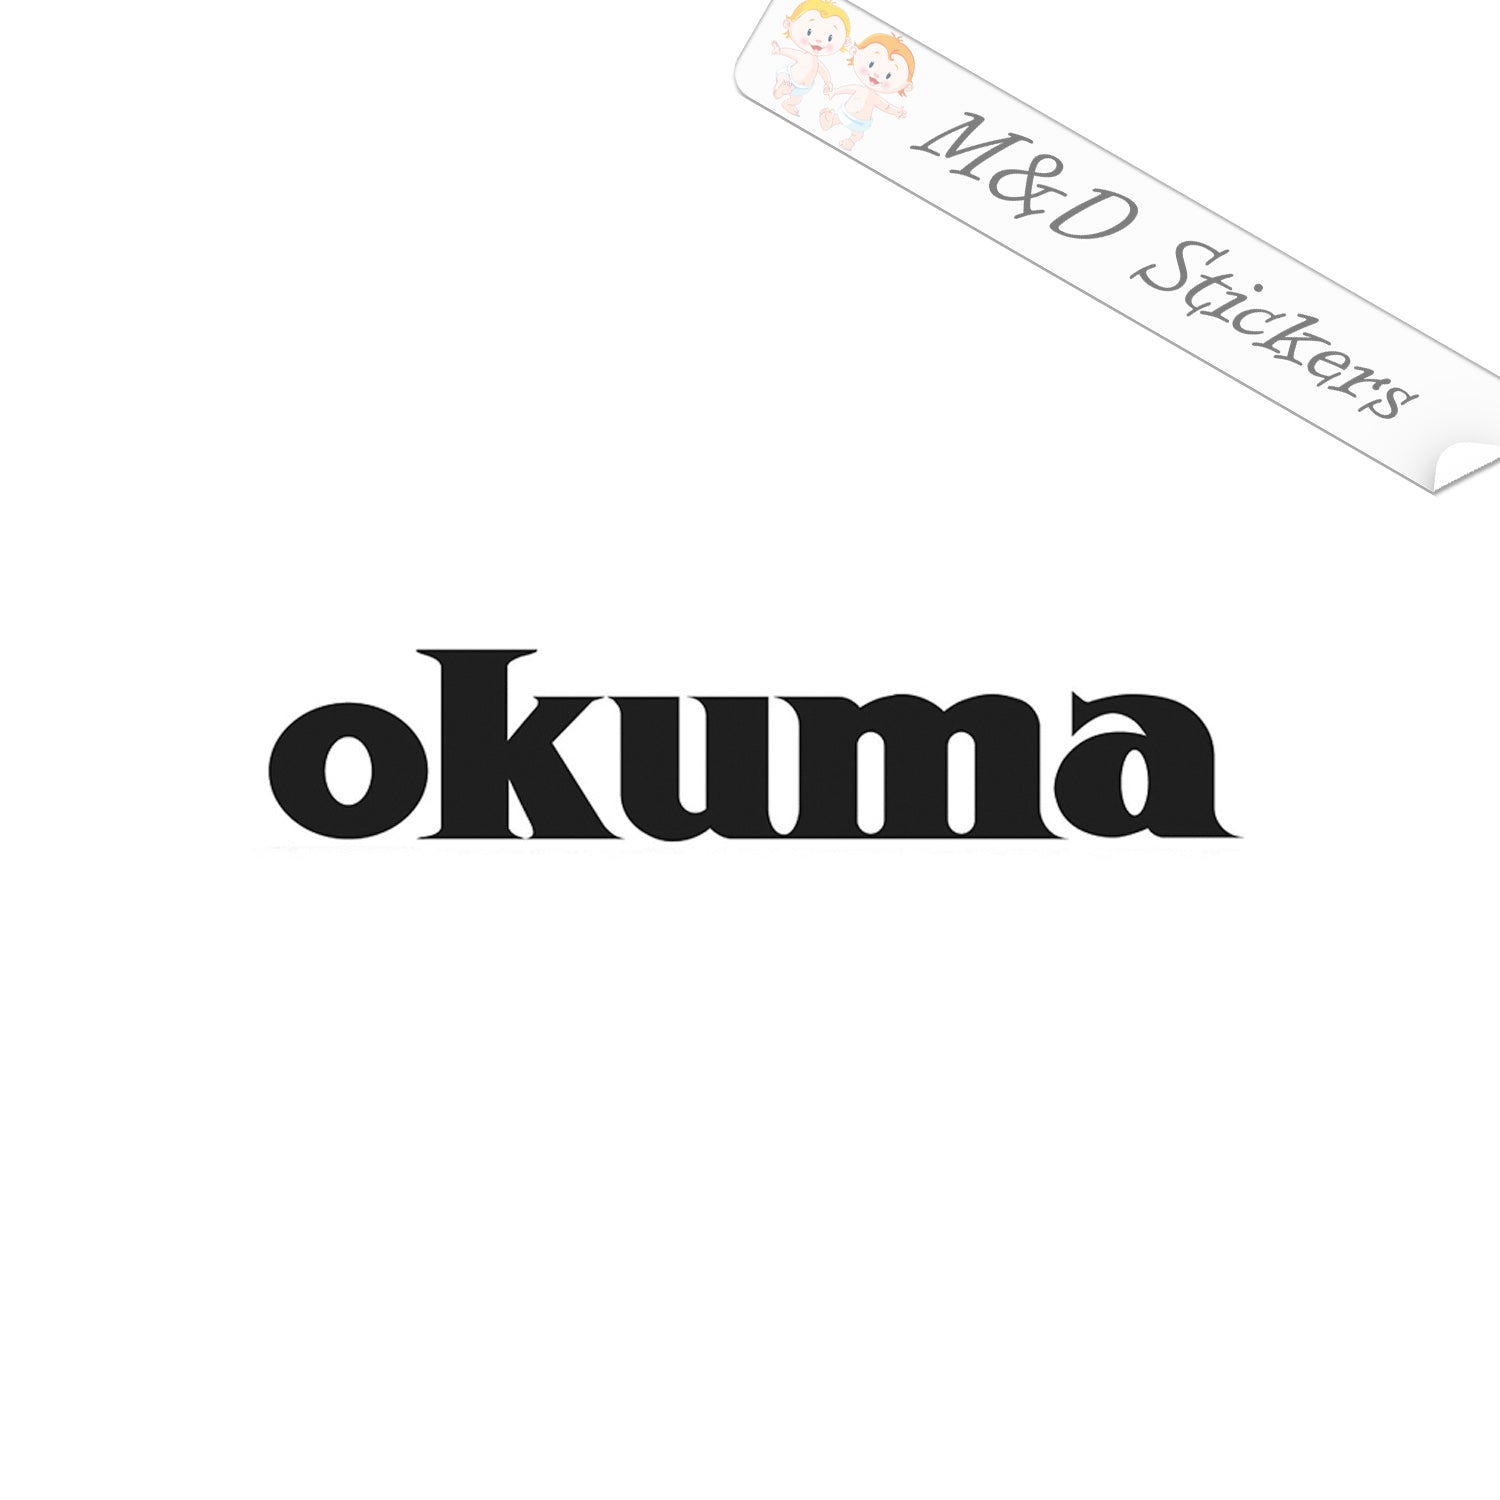 Okuma Fishing Logo (4.5 - 30) Vinyl Decal in Different colors & size –  M&D Stickers